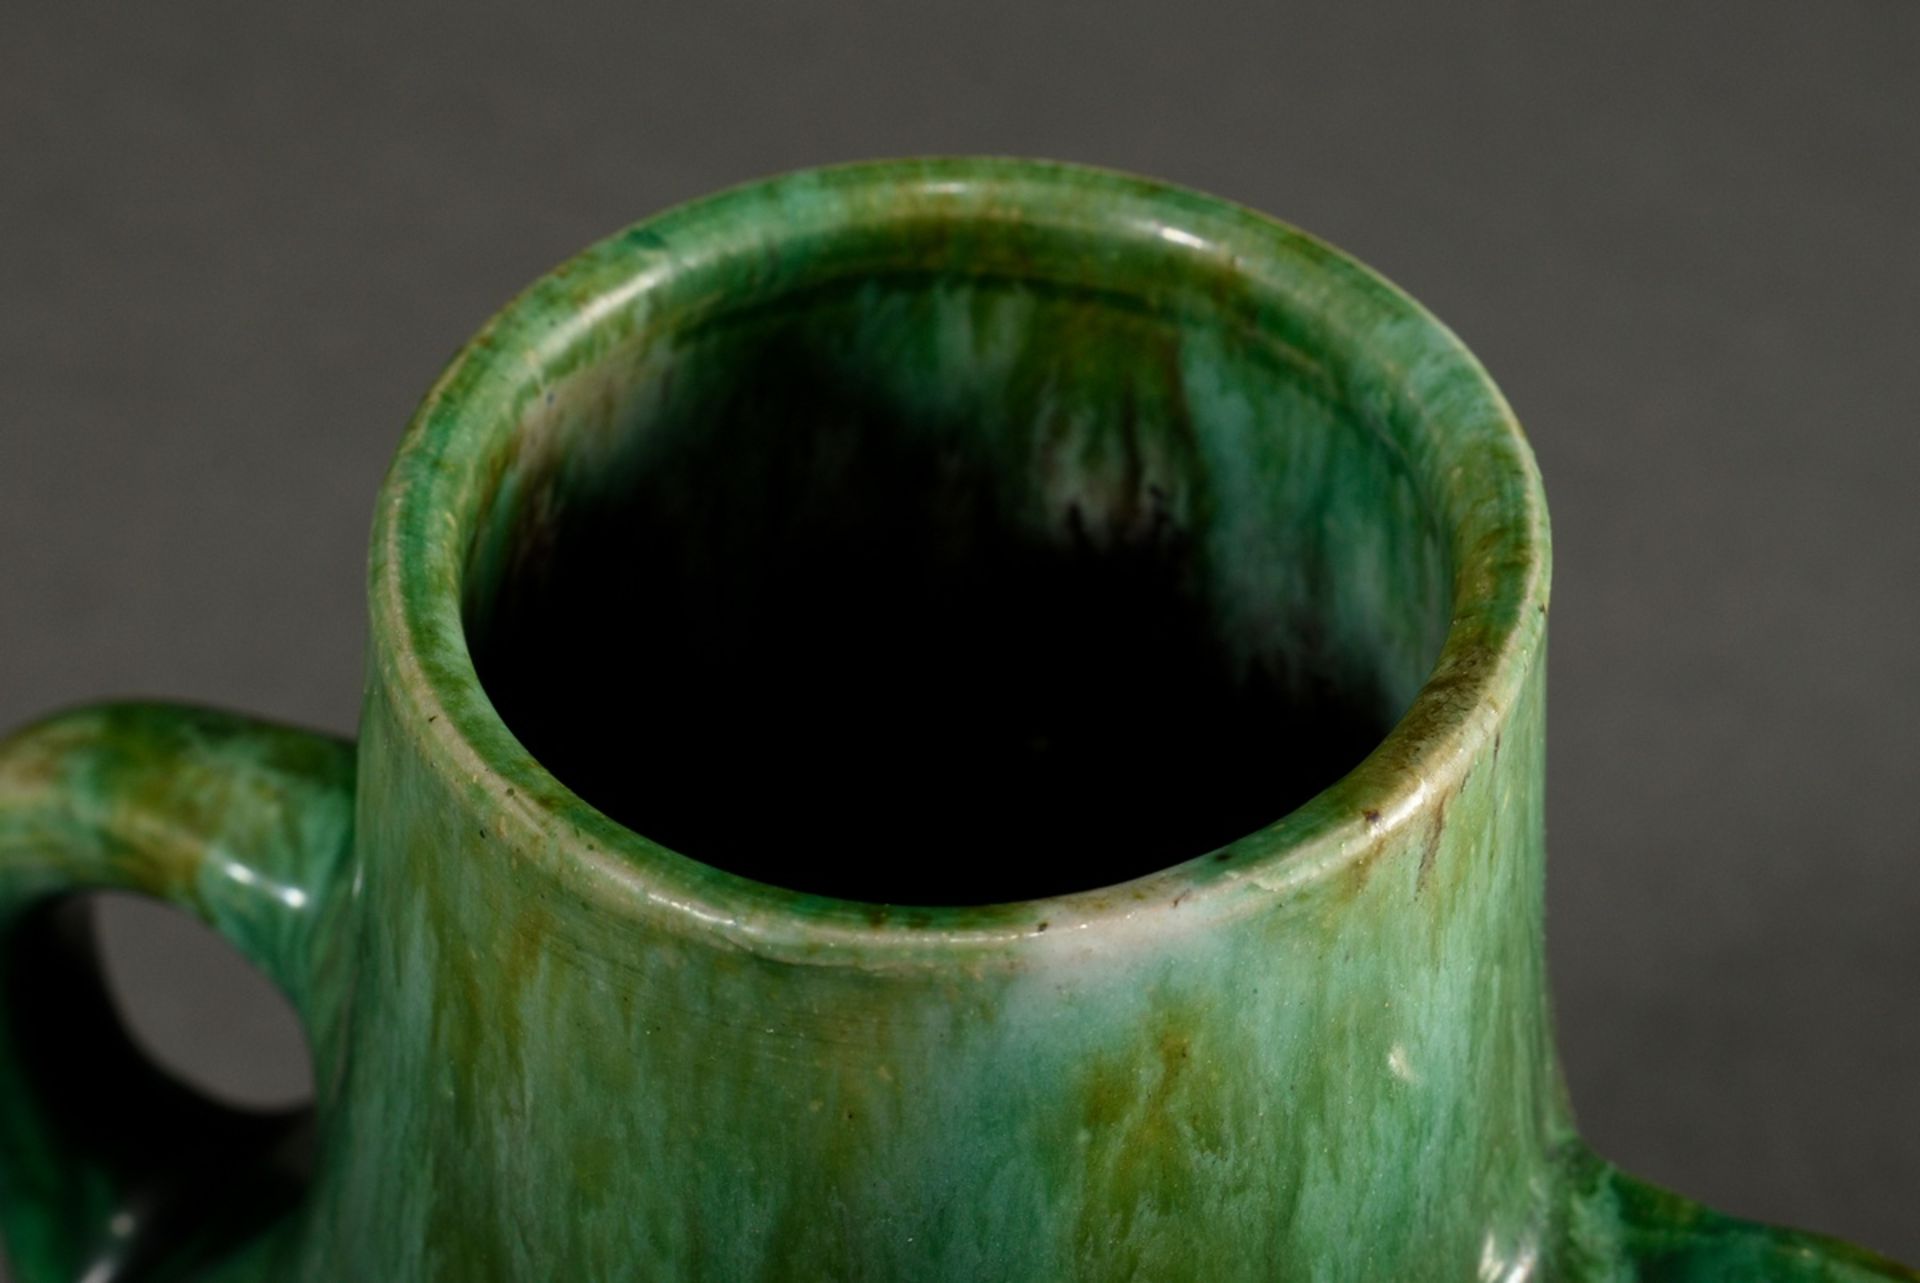 Small ceramic vase with tapering neck and two handles, ceramic with gradient glaze in shades of gre - Image 3 of 5